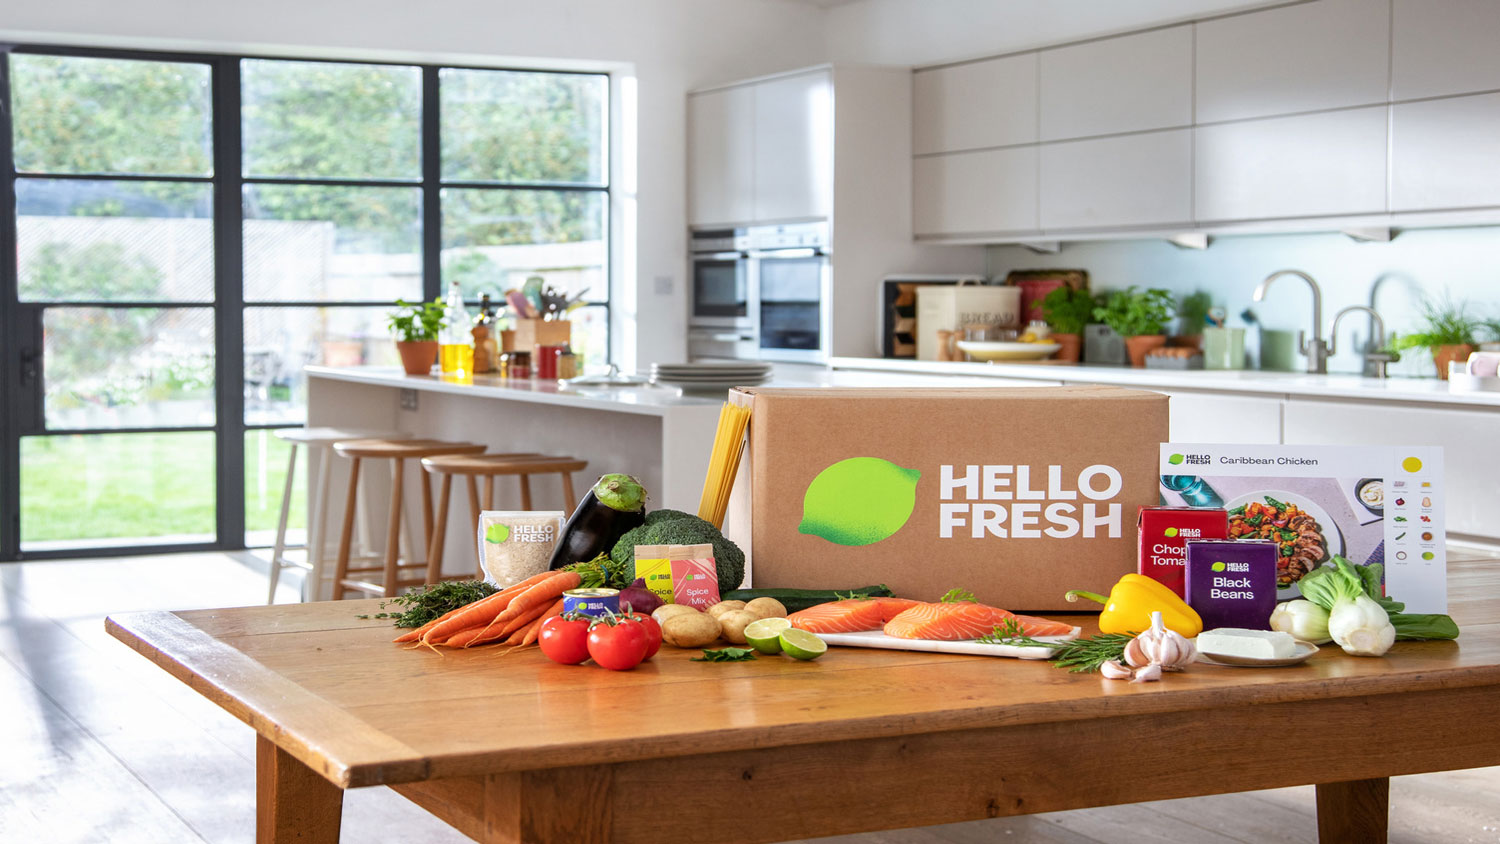 A Hello Fresh branded box surrounded by fresh produce on a table inside a kitchen.